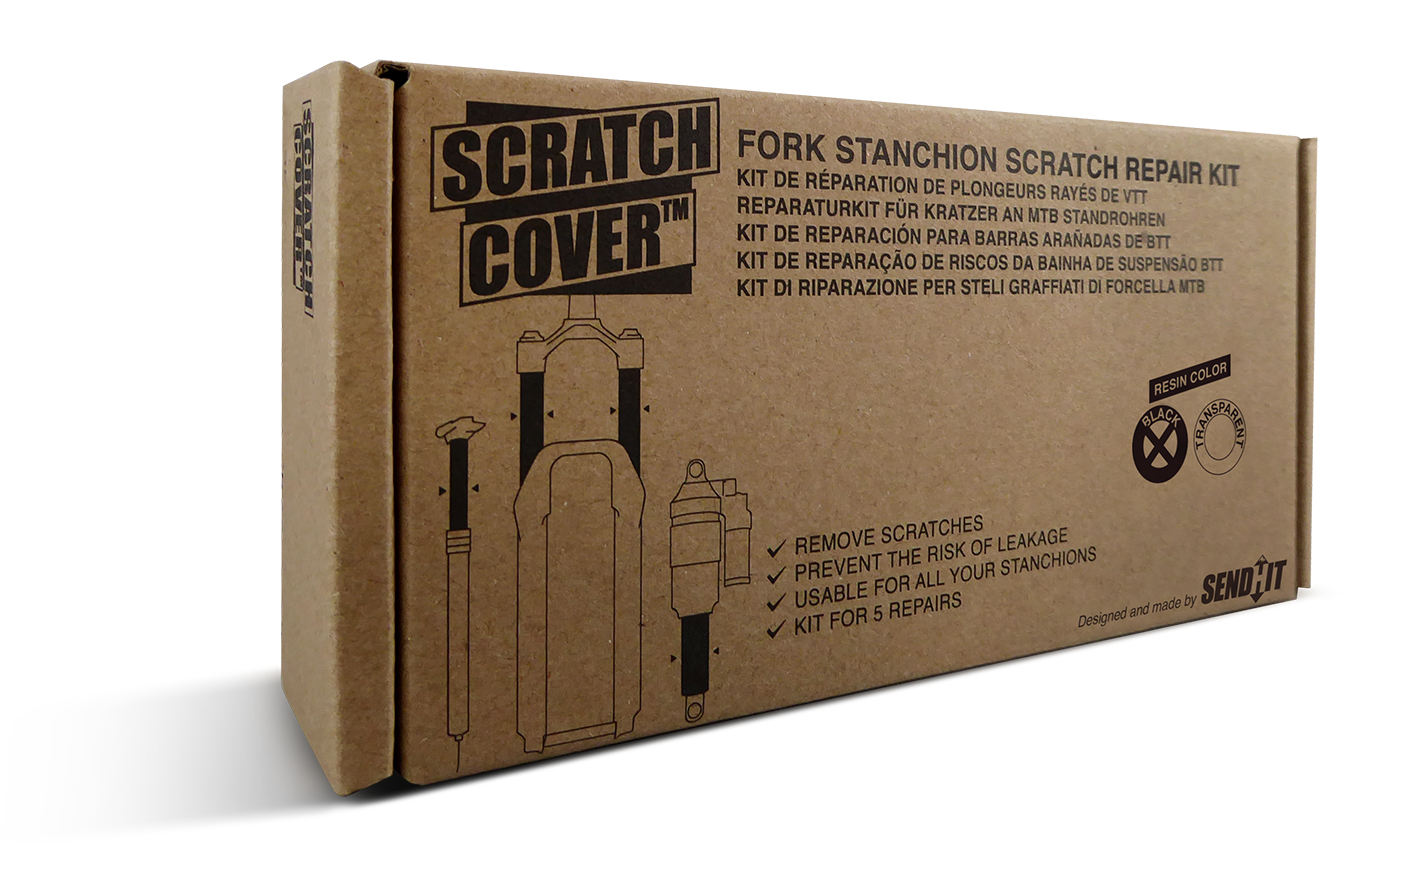 Scratched suspension fork? Erase scratches with Sendhit’s complete stanchion repair kit